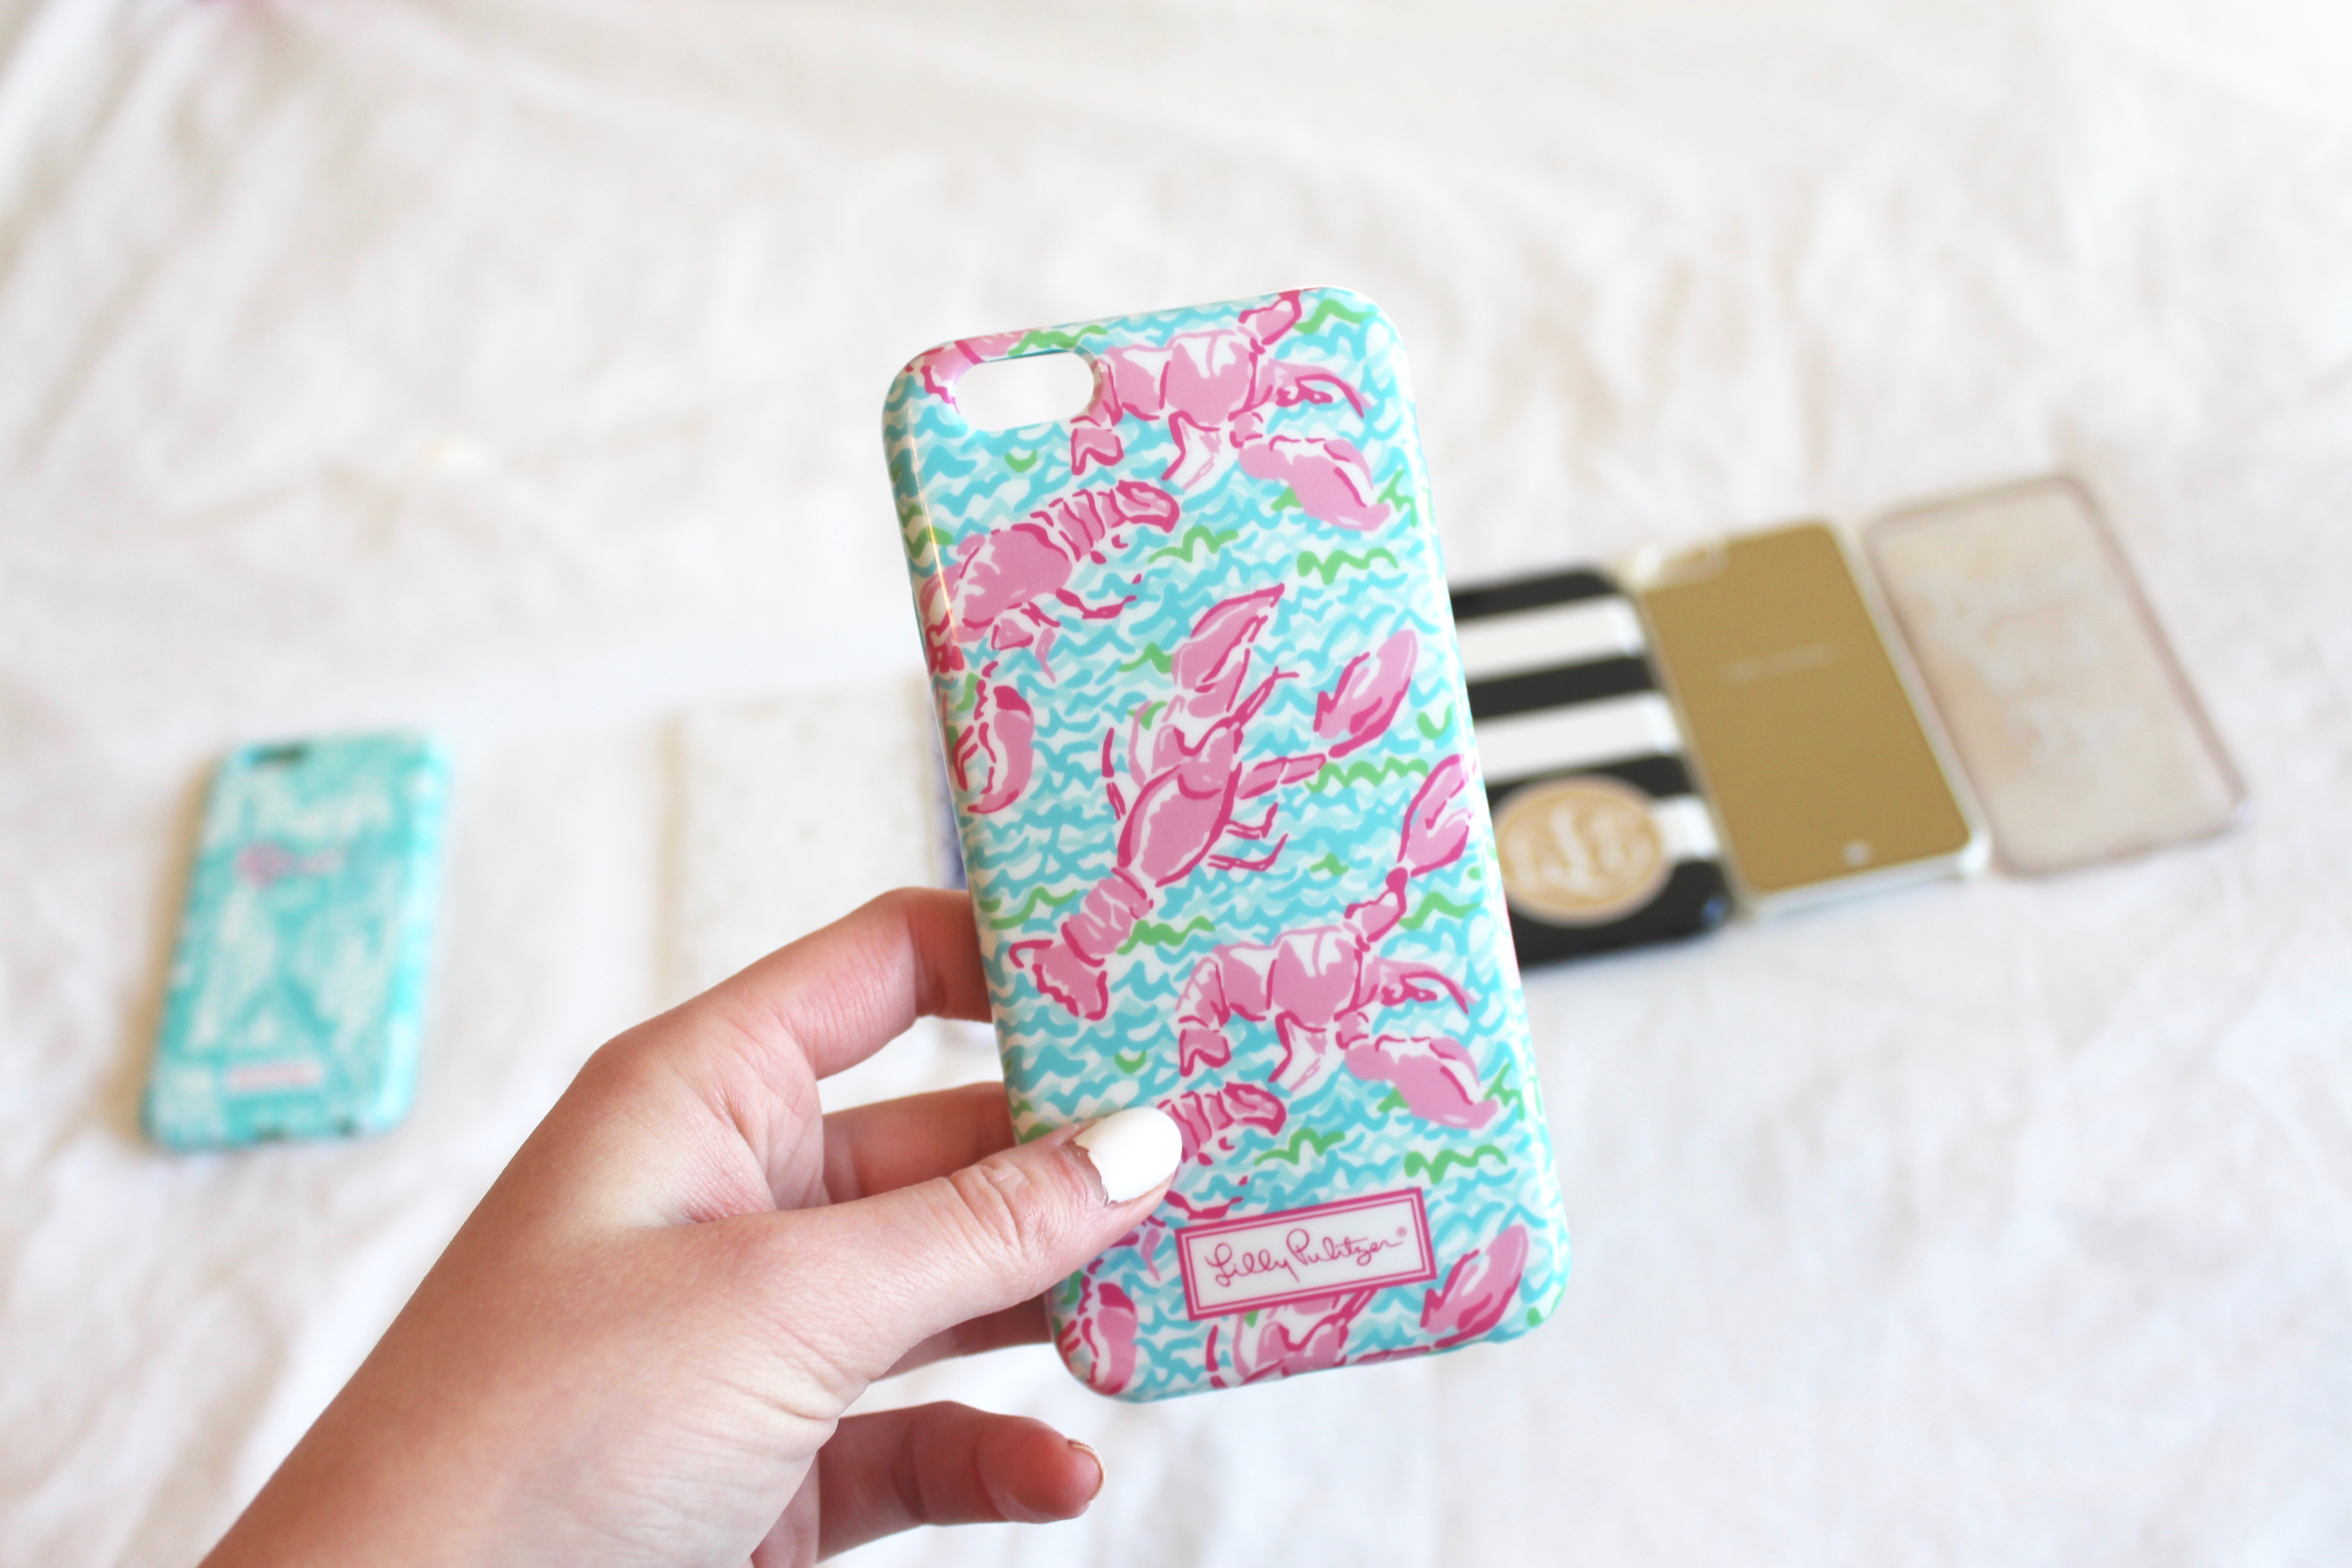 iPhone 6/6s Phone Case Haul | What Cases I'm loving! by Lauren Lindmark on Daily Dose of Charm